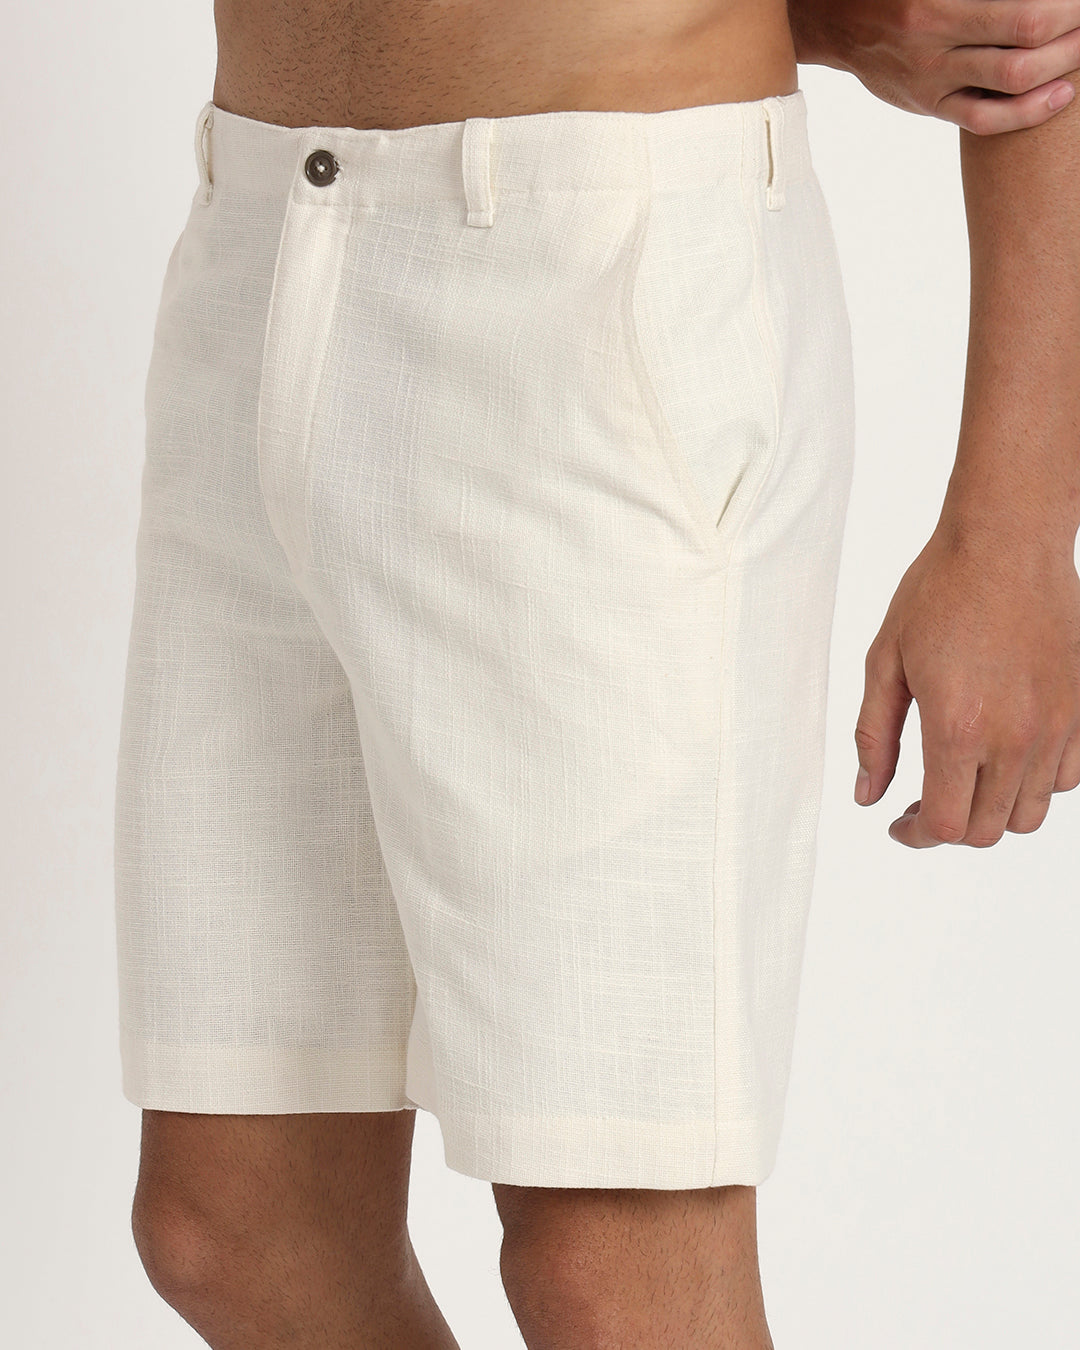 Combo : Ready For Anything White & Black Men's Shorts